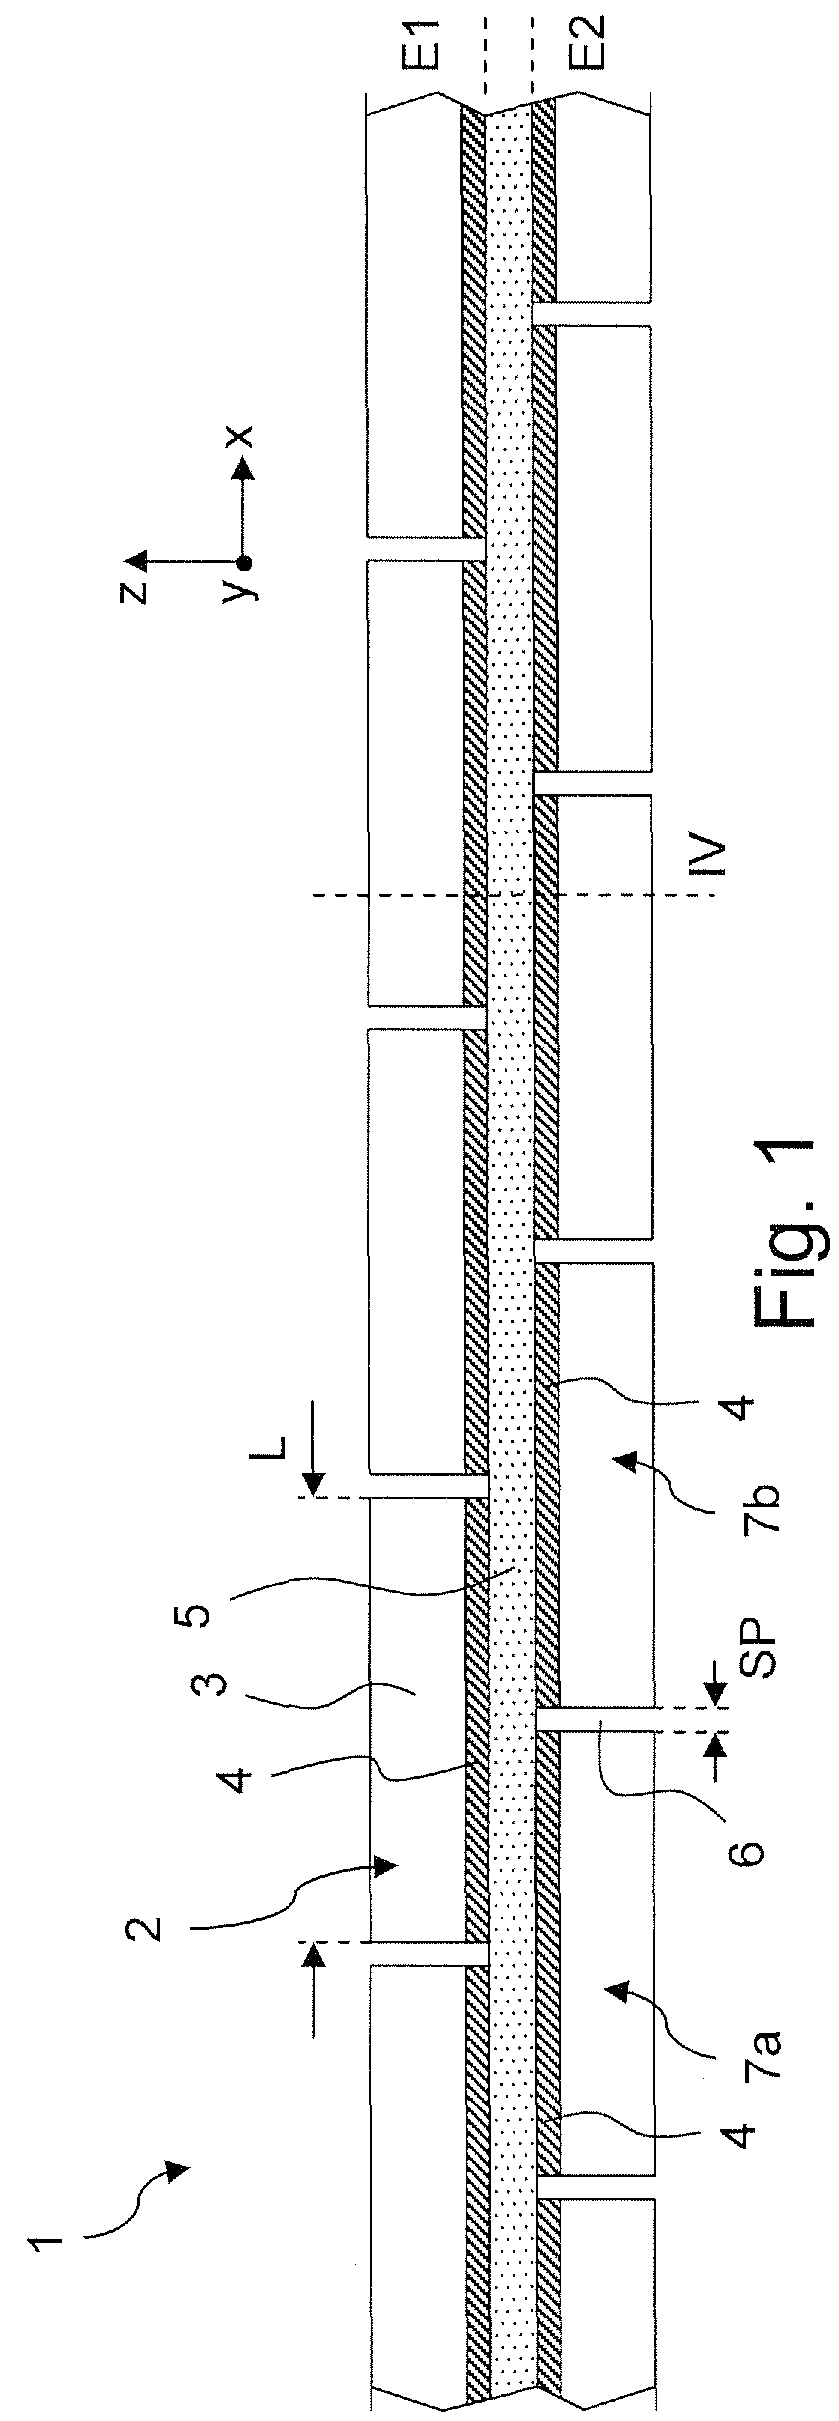 NMR spectrometer comprising a superconducting magnetic coil having windings composed of a superconductor structure having strip pieces chained together